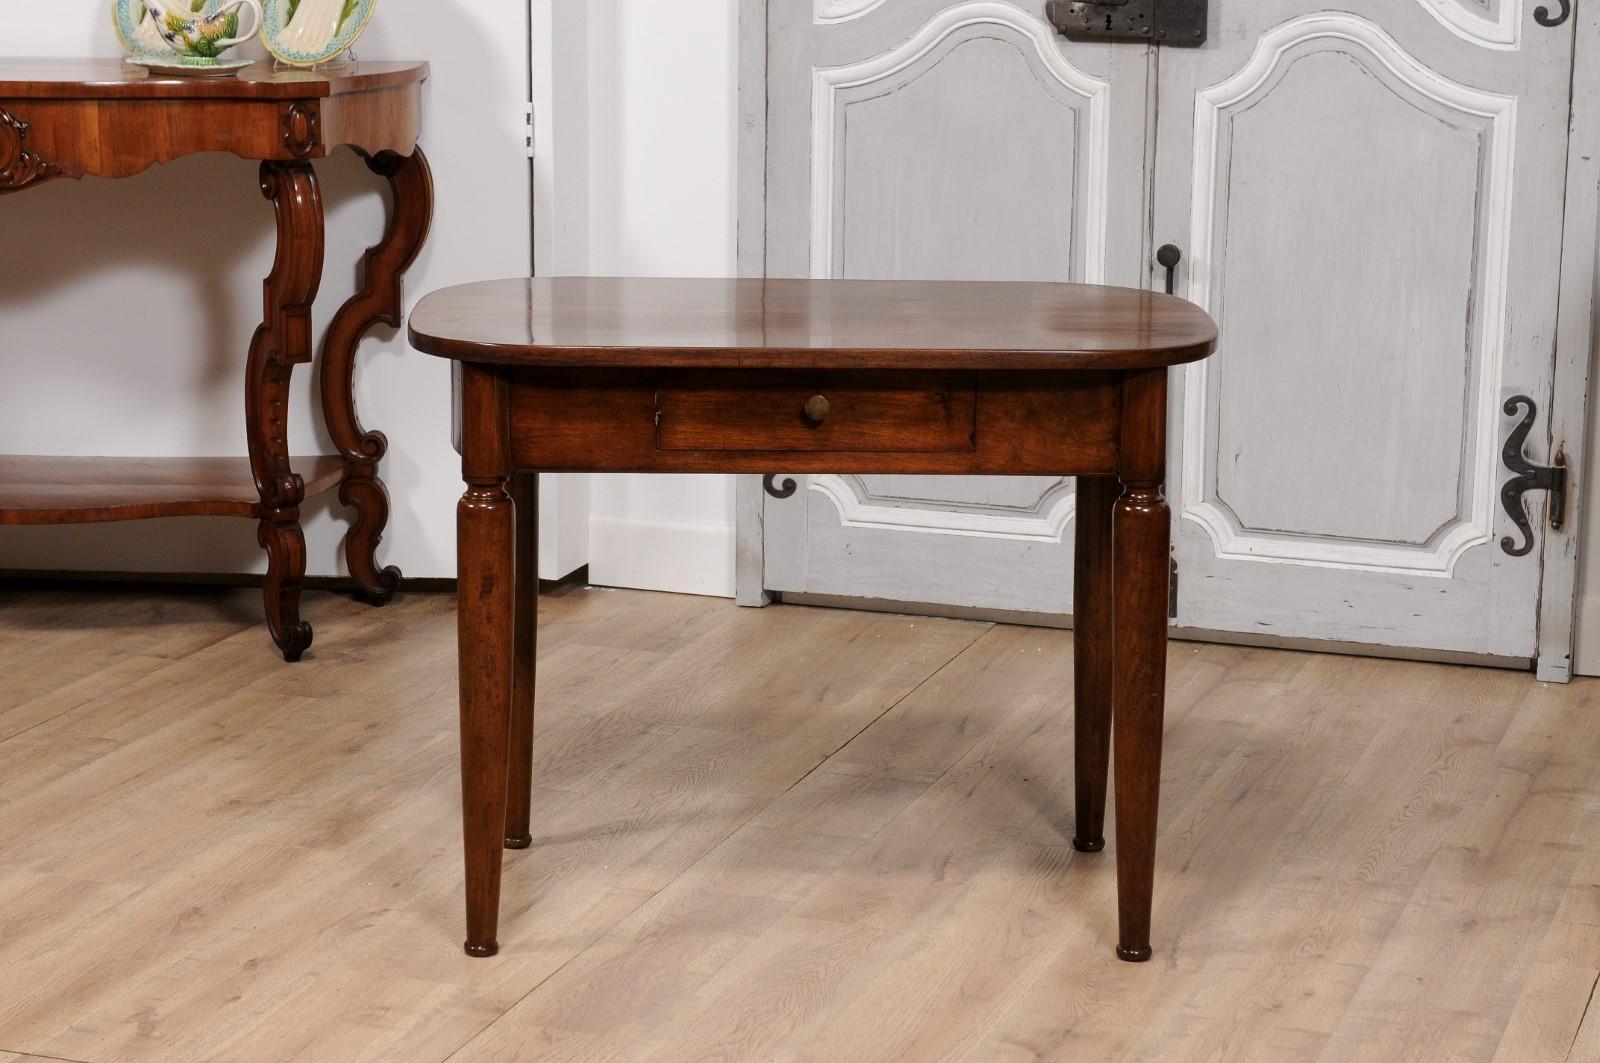 Italian Walnut 1890s Side Table with Oval Top, One Drawer and Cylindrical Legs In Good Condition For Sale In Atlanta, GA